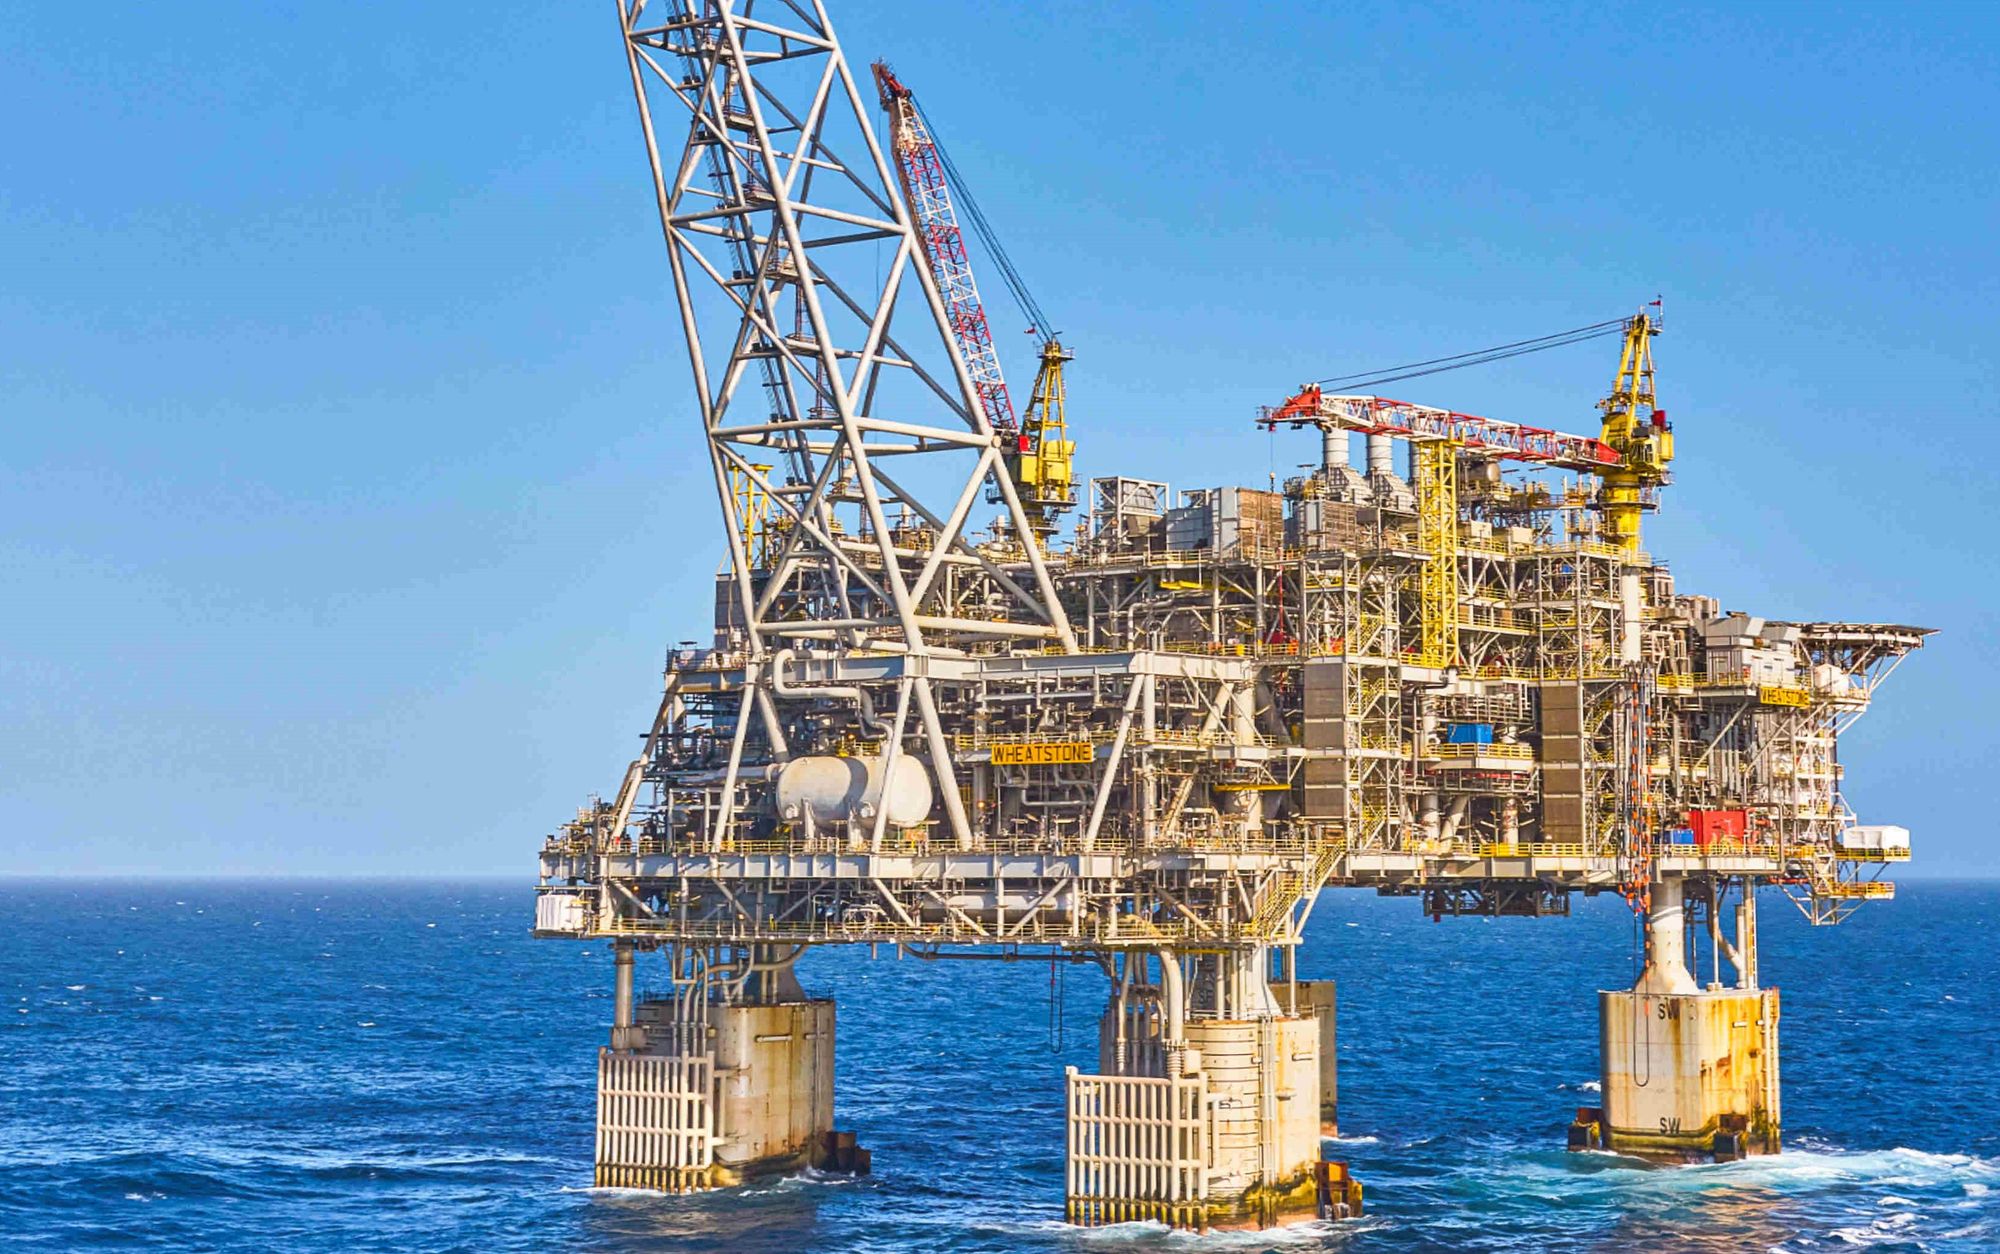 Wheatstone startup threatened by offshore problems